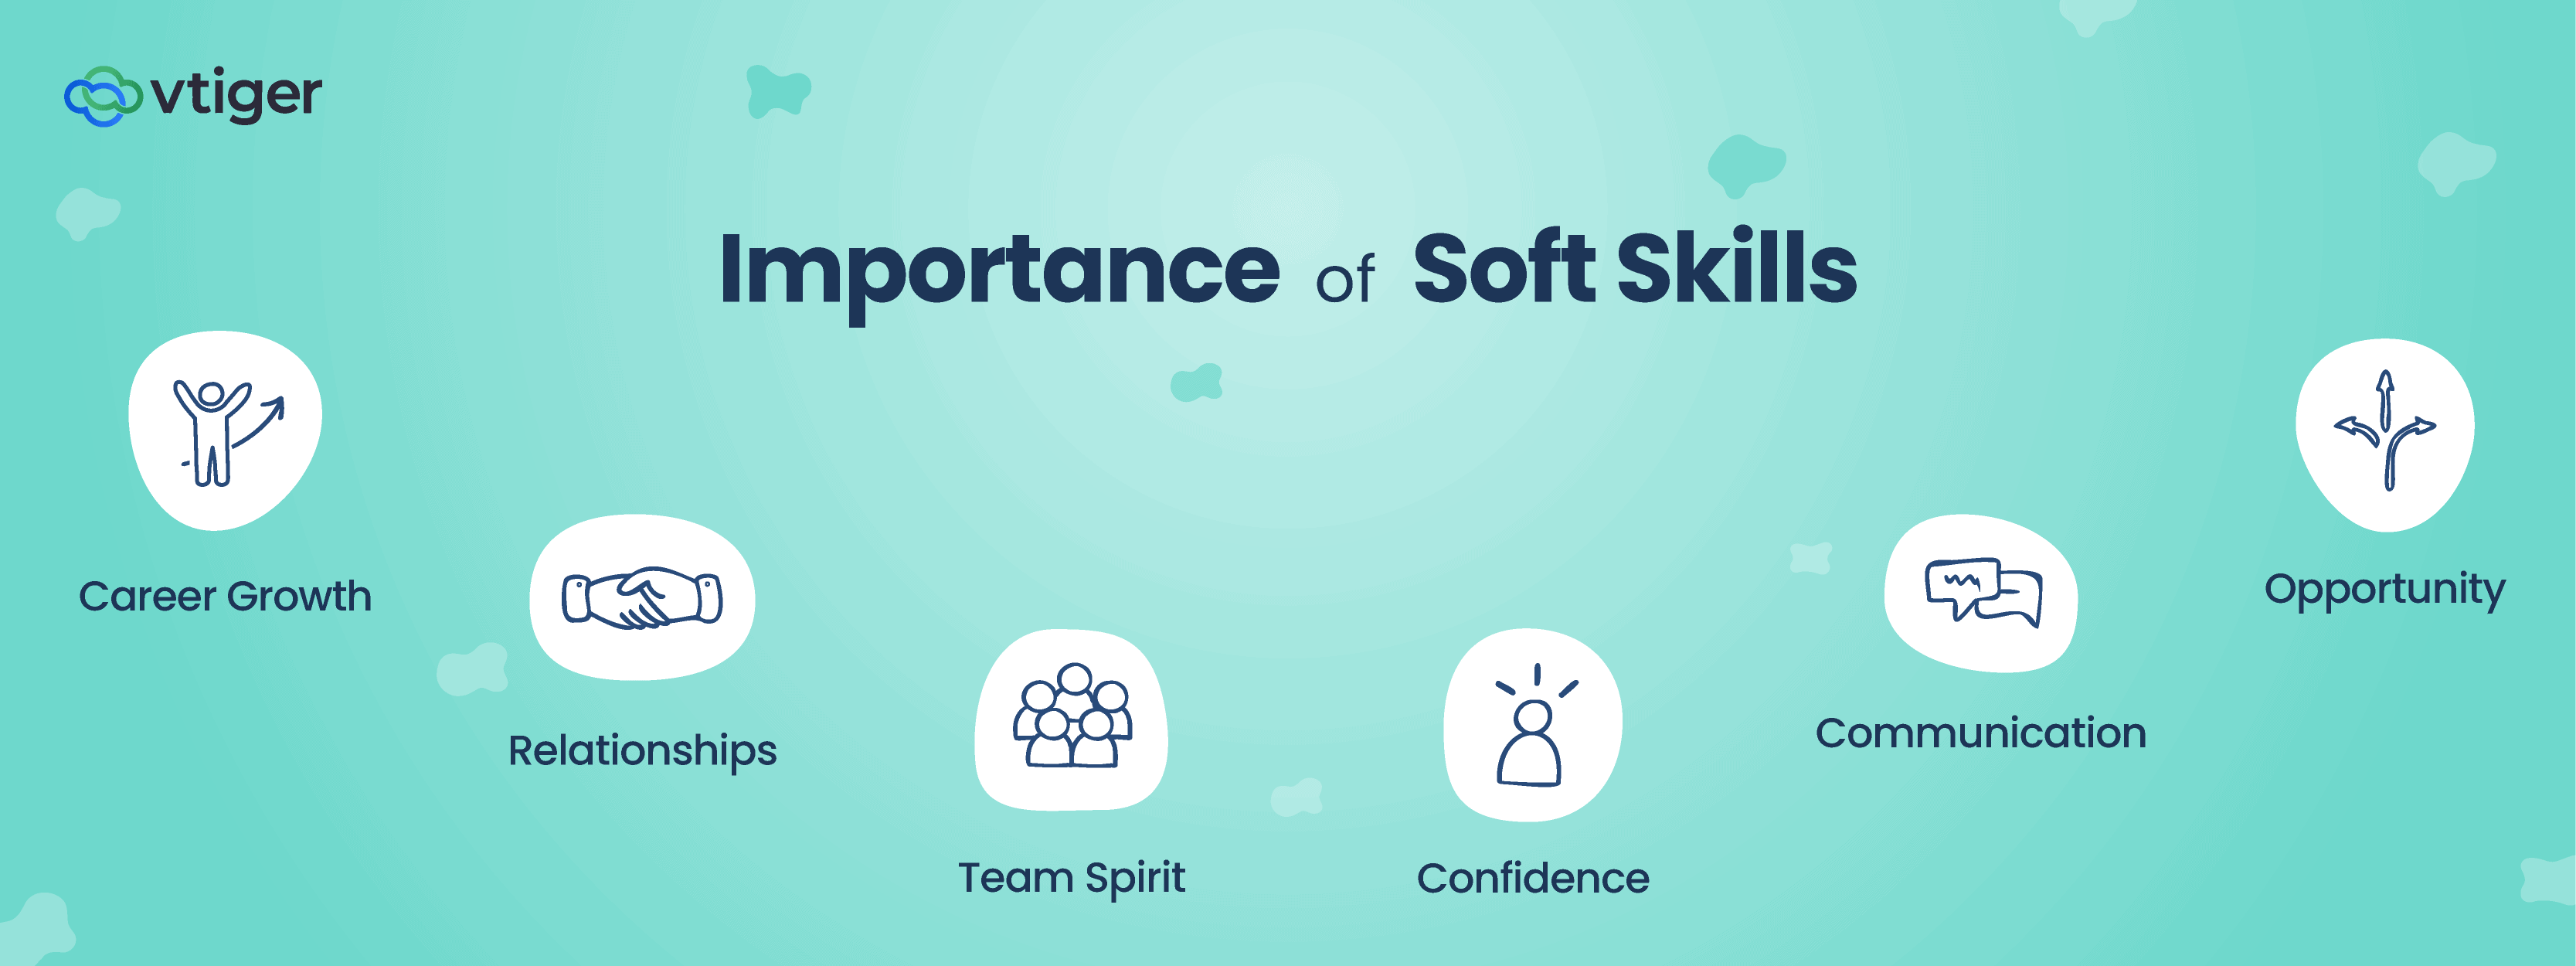 Understanding the Importance of Soft Skills in the Workplace